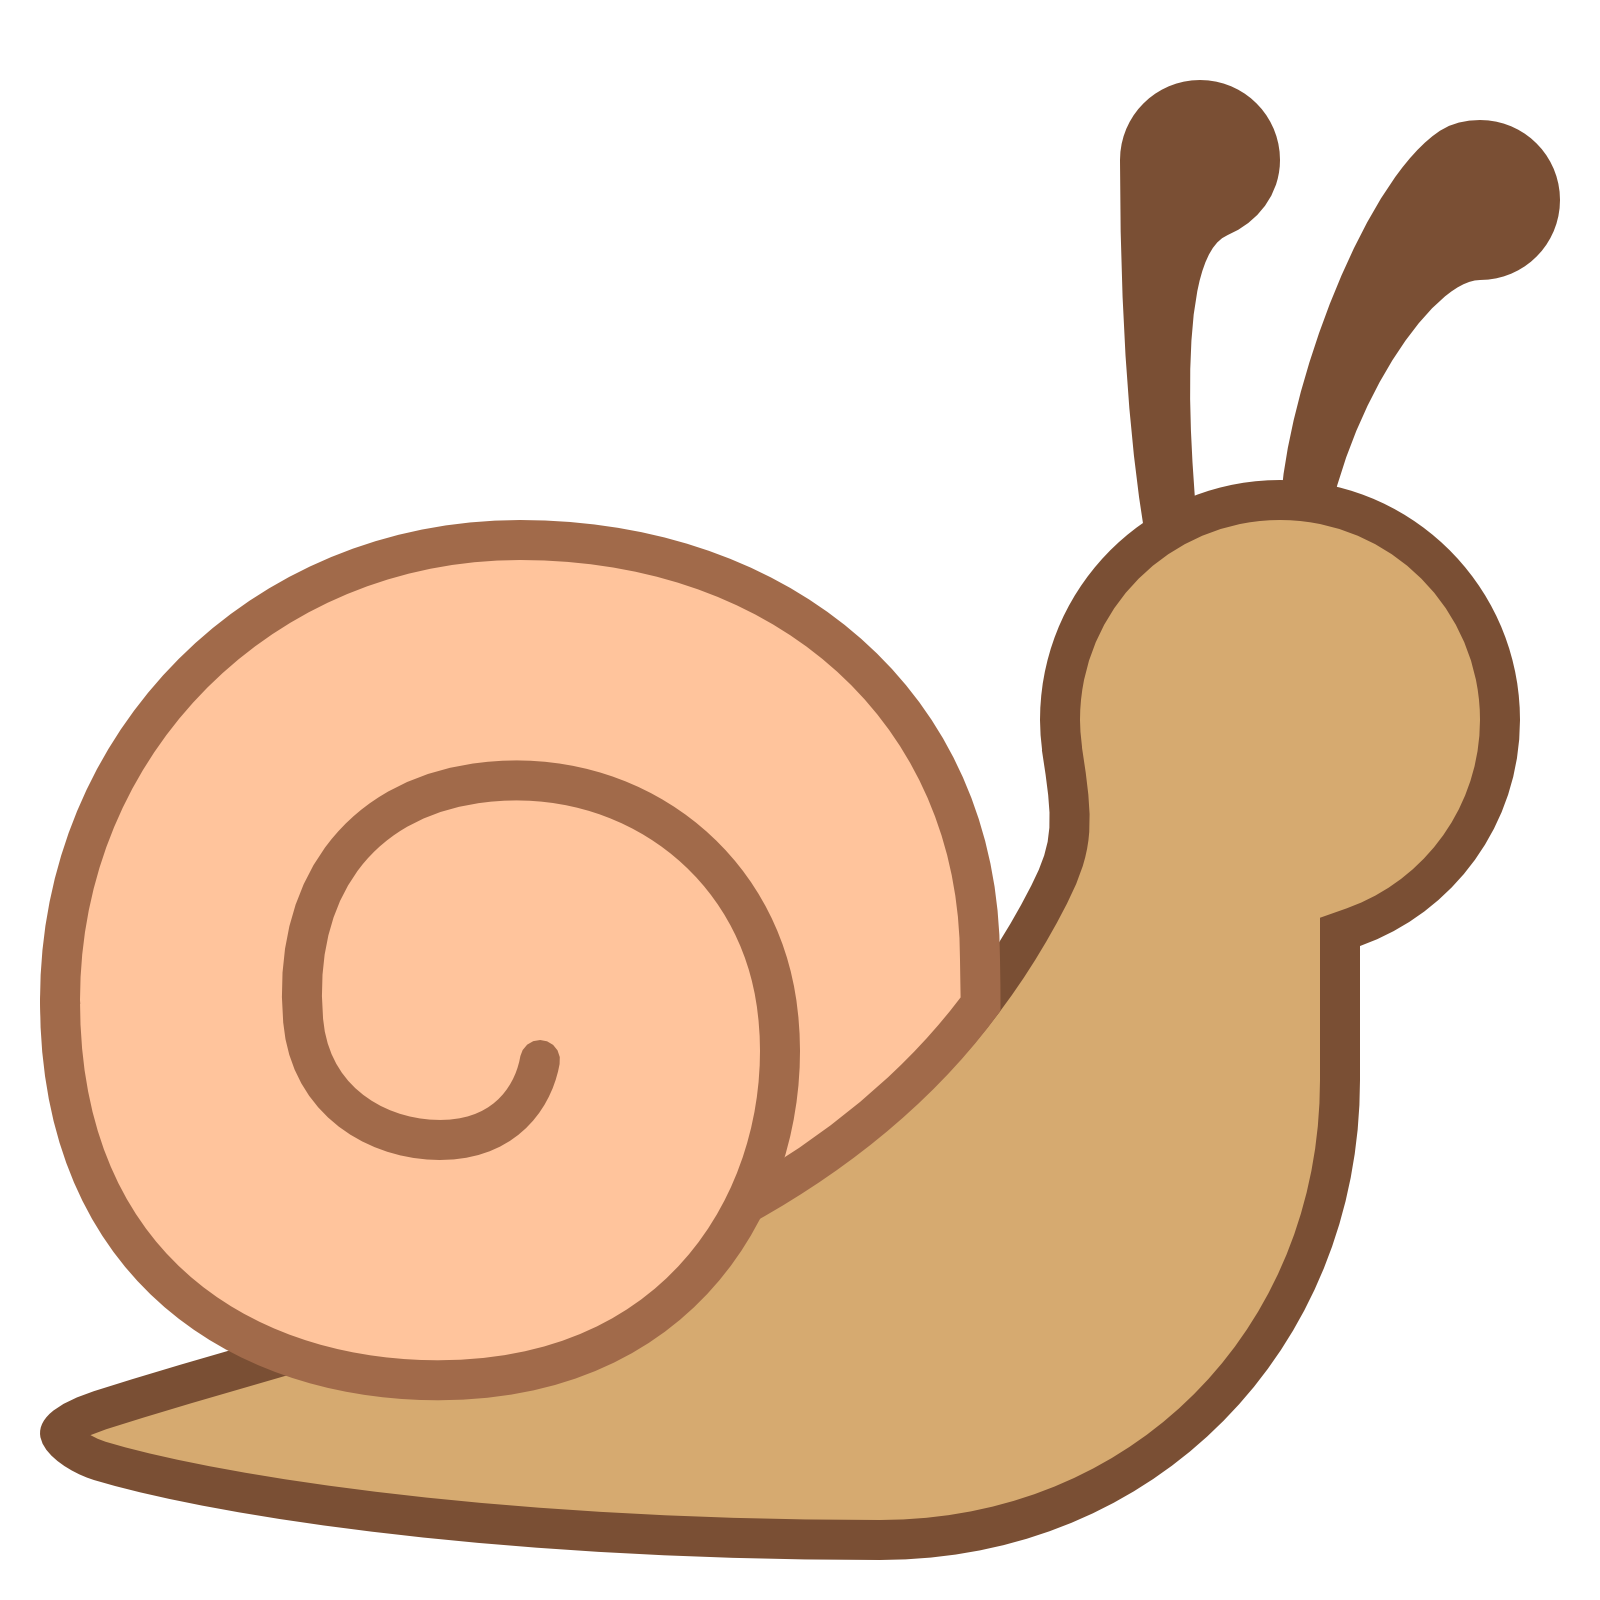 Snail svg #18, Download drawings